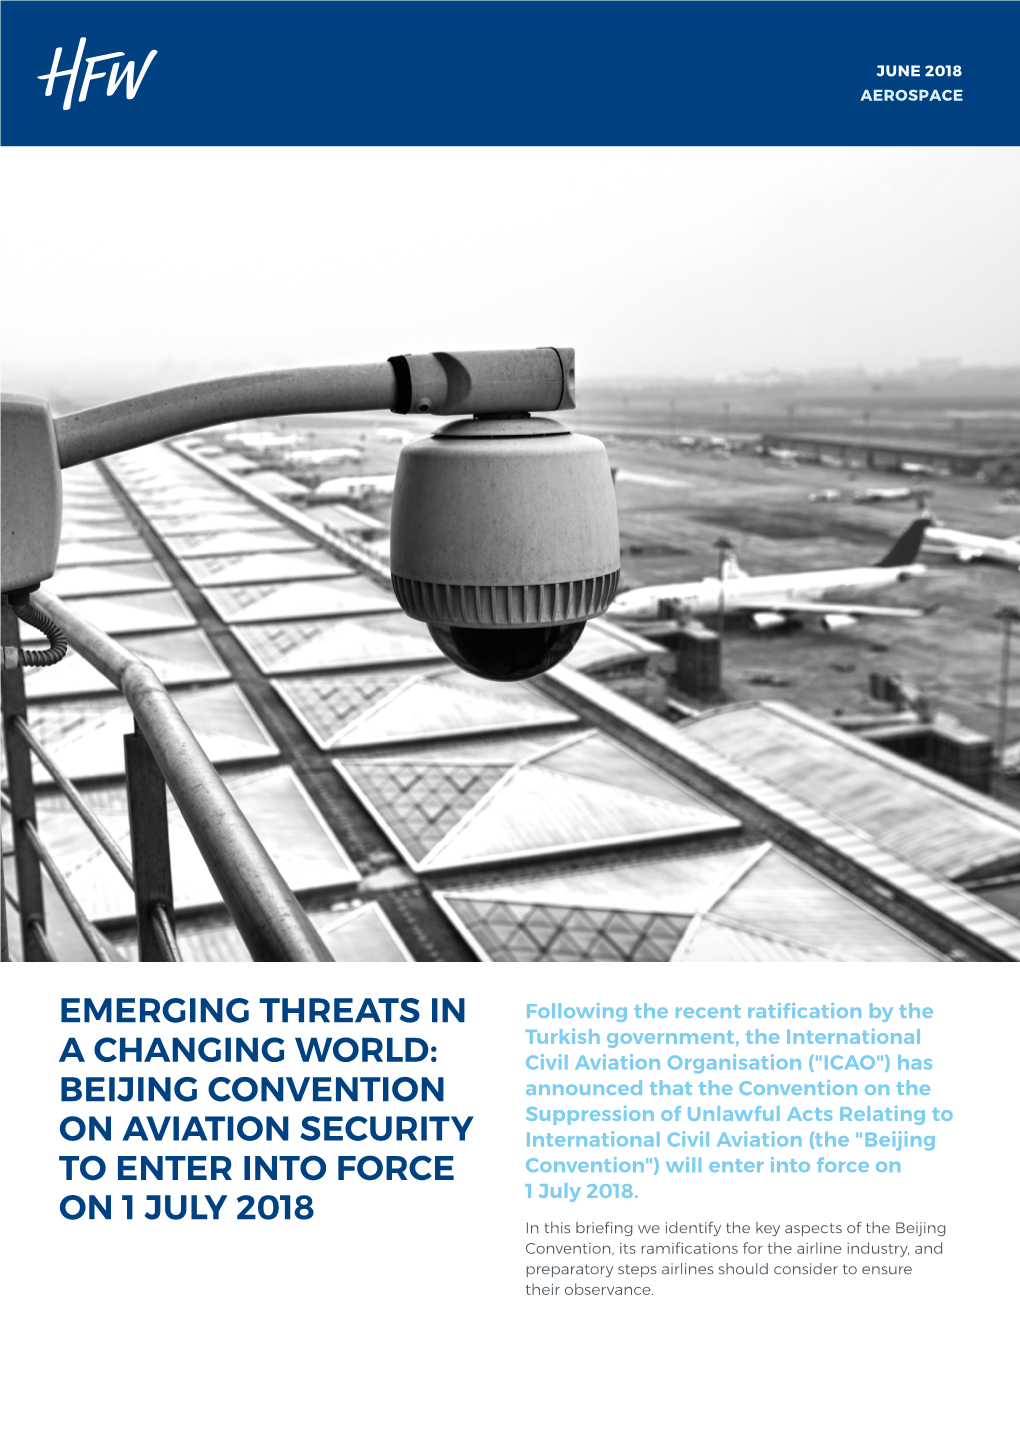 Emerging Threats in a Changing World: Beijing Convention on Aviation